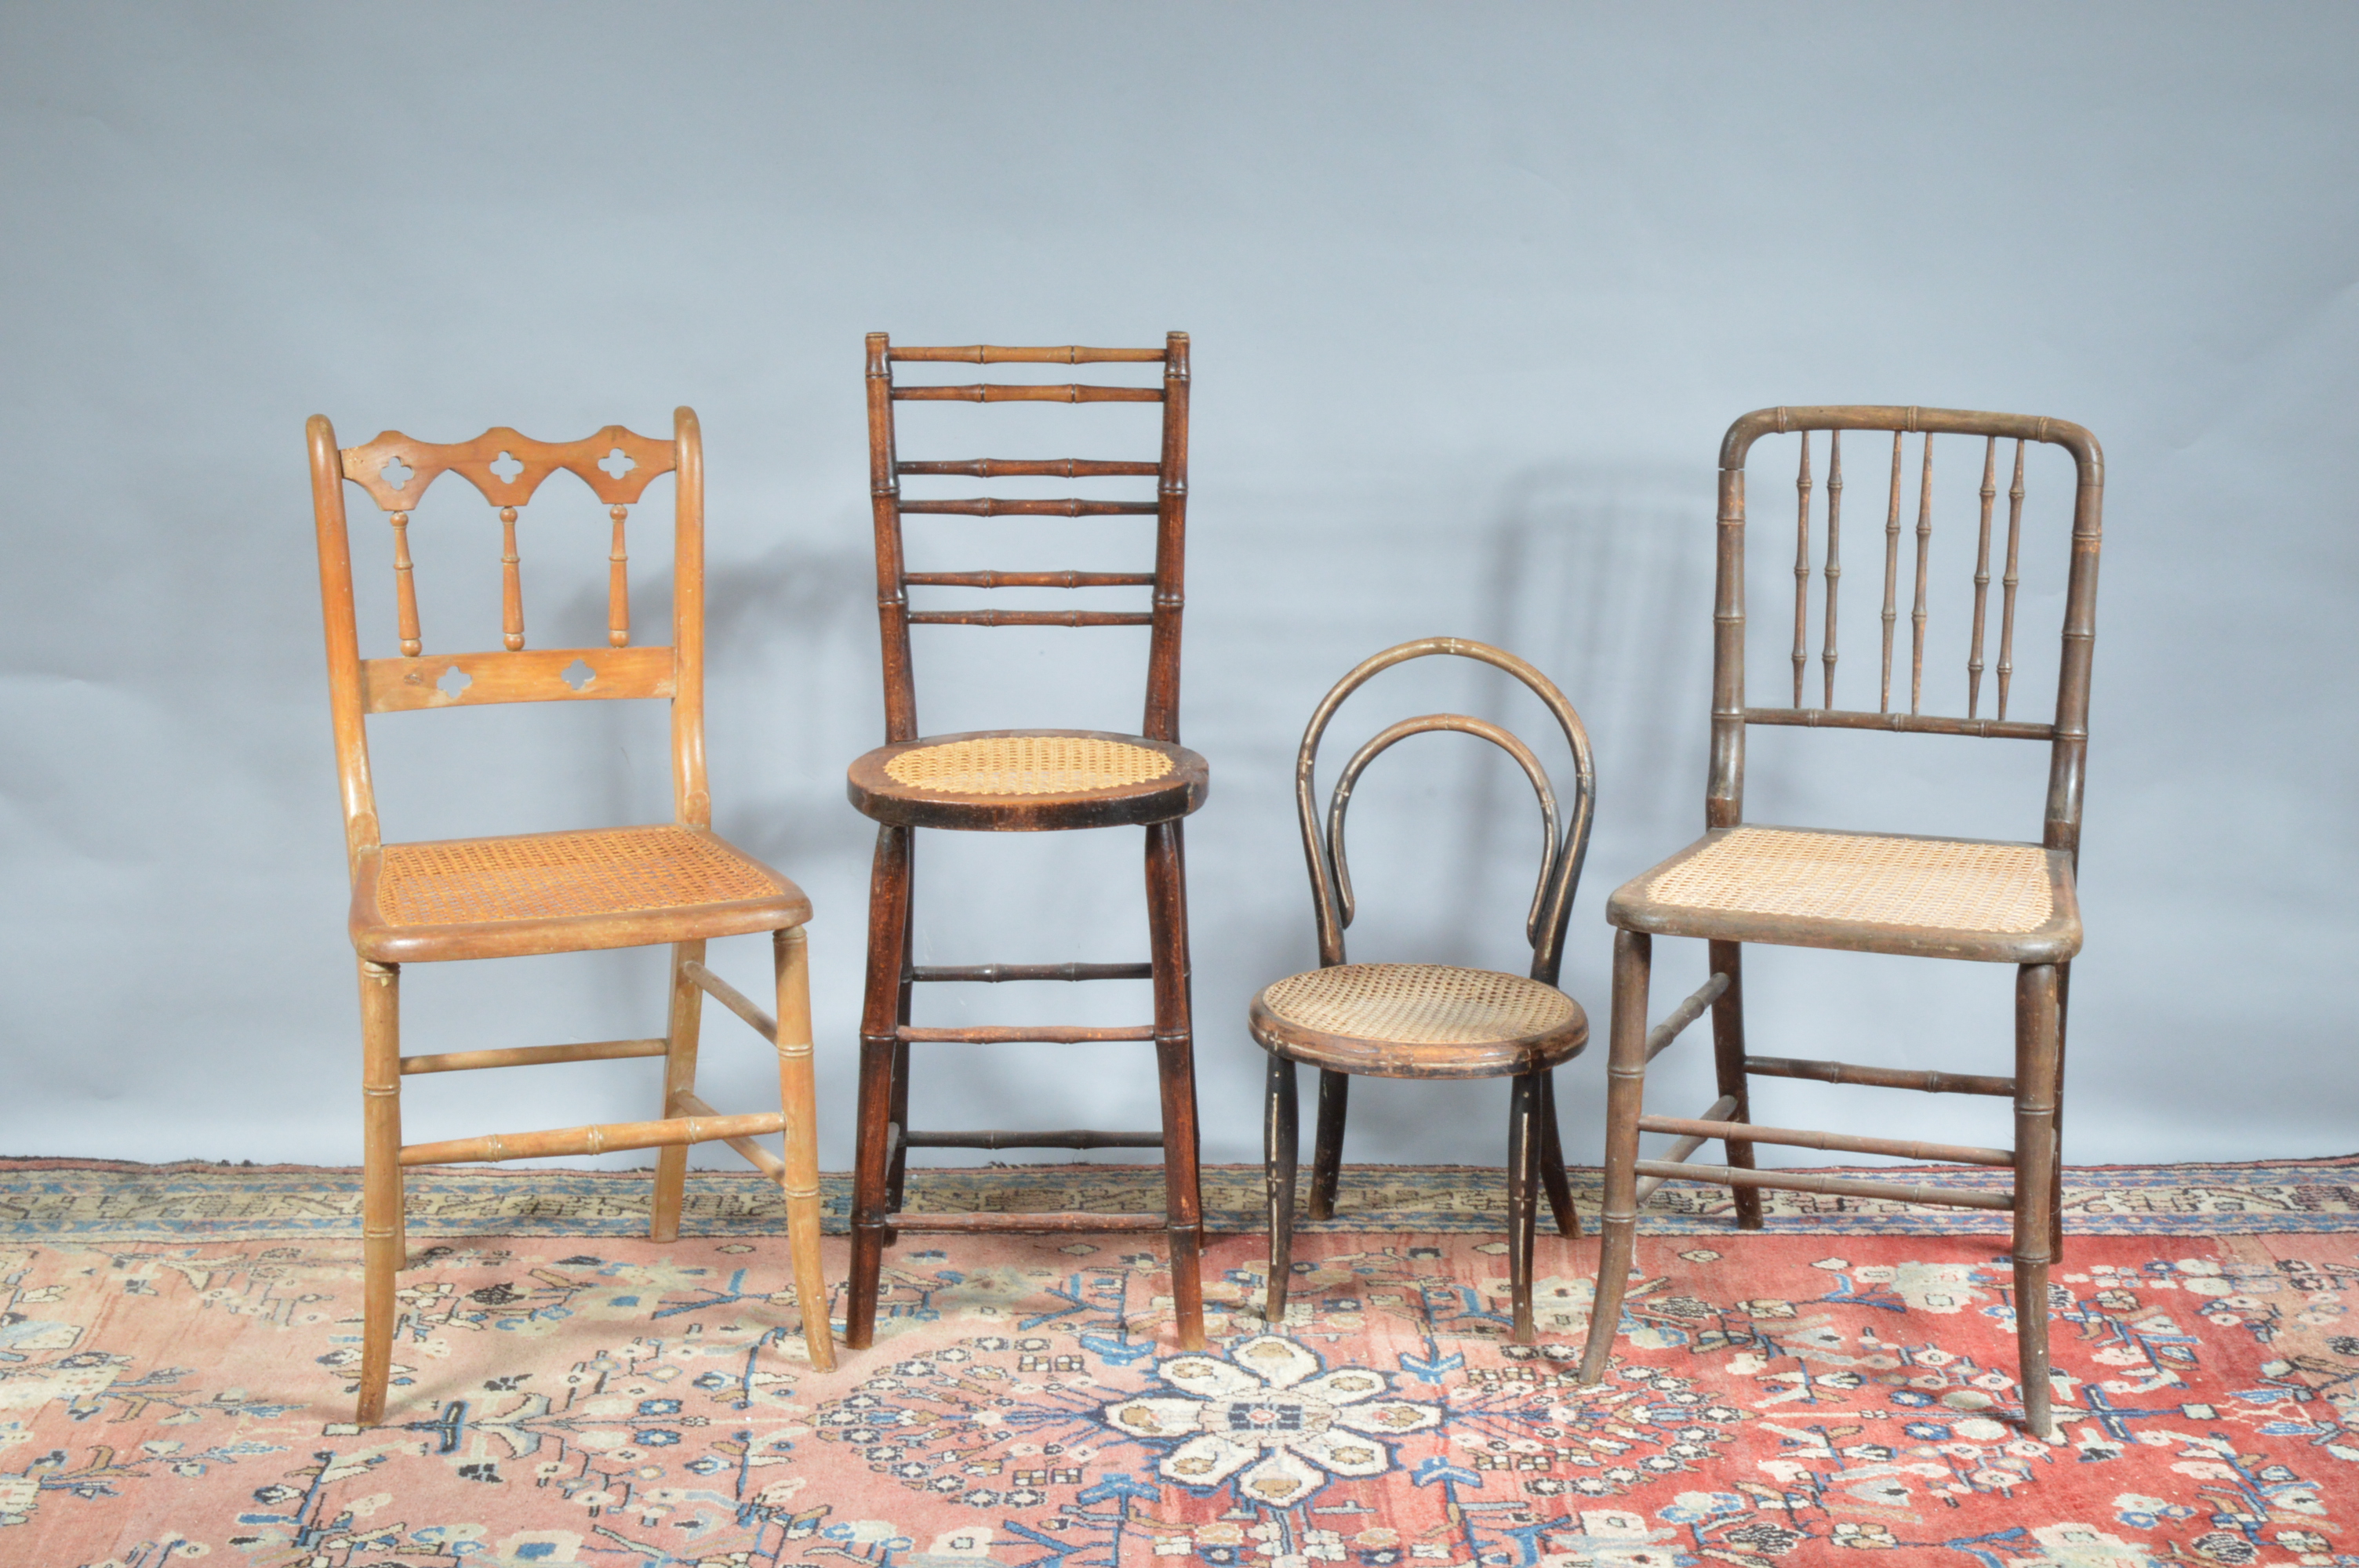 Four 19th century and later caned seats, differing styles and sizes, one a high seat with bamboo